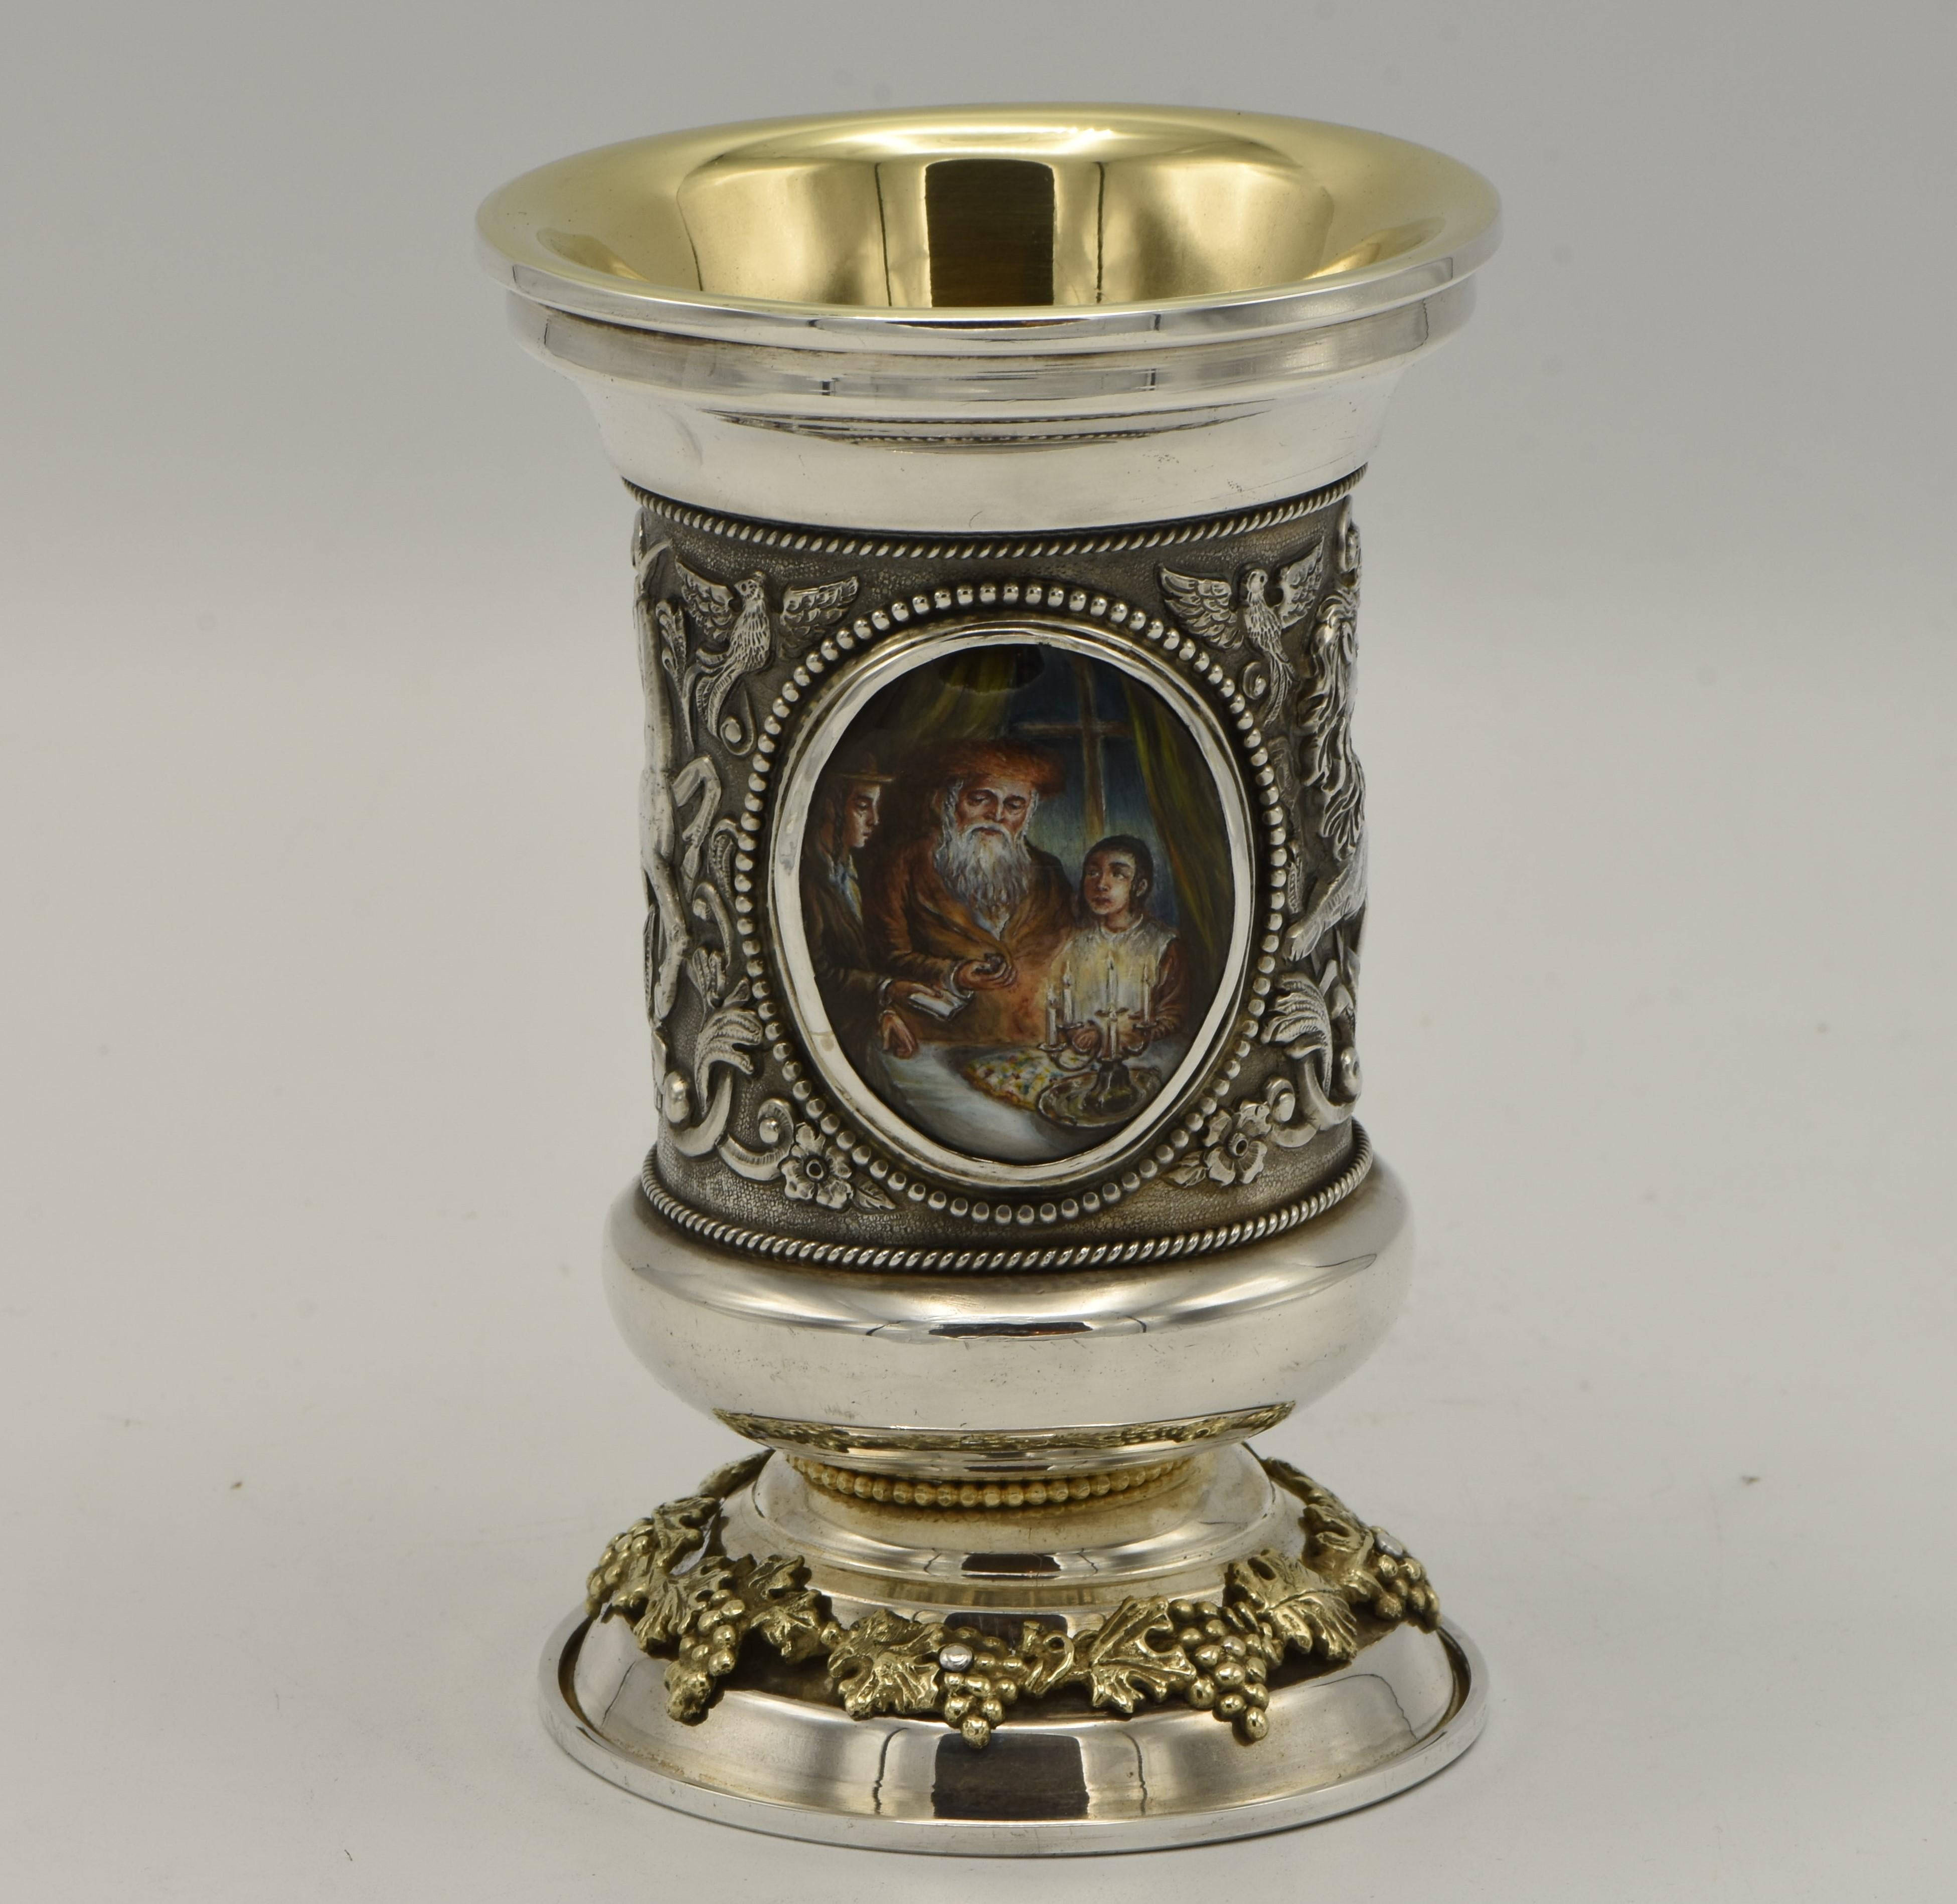 Handmade sterling silver Kiddush Goblet, Y. Chaskelson, Israel, circa 1990.
The goblet is decorated with two colorful hand painted enamel plaques, one depicts mother and daughter blessing on the Shabbat candles, the other plaque depicts father and